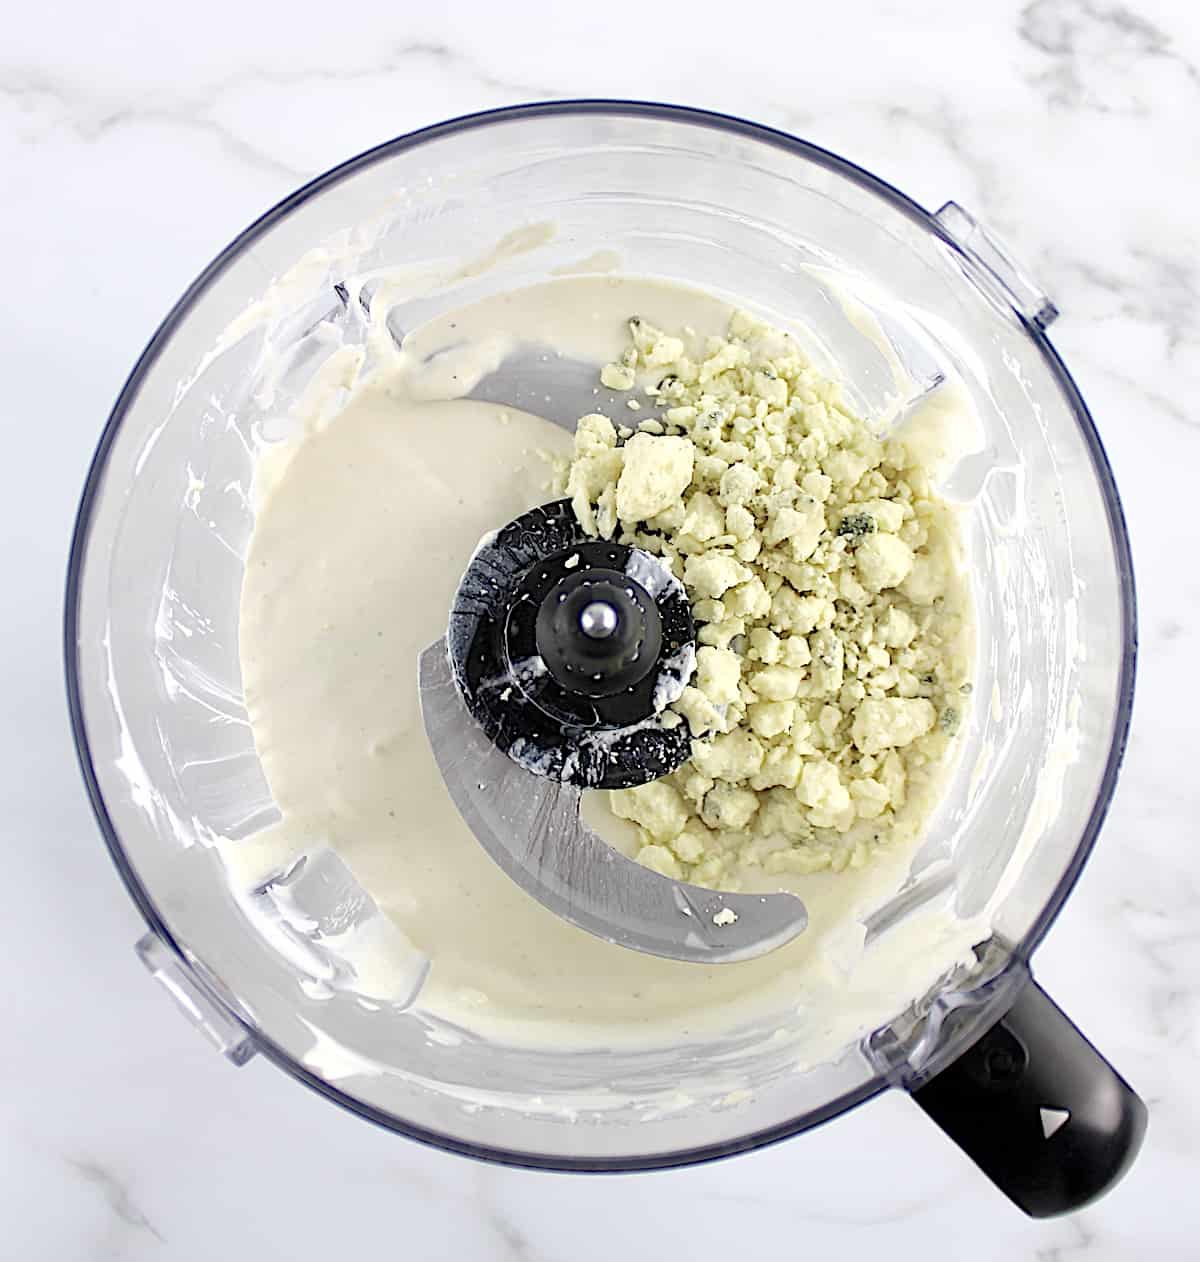 Keto Blue Cheese Dressing with blue cheese crumbles in food processor unmixed